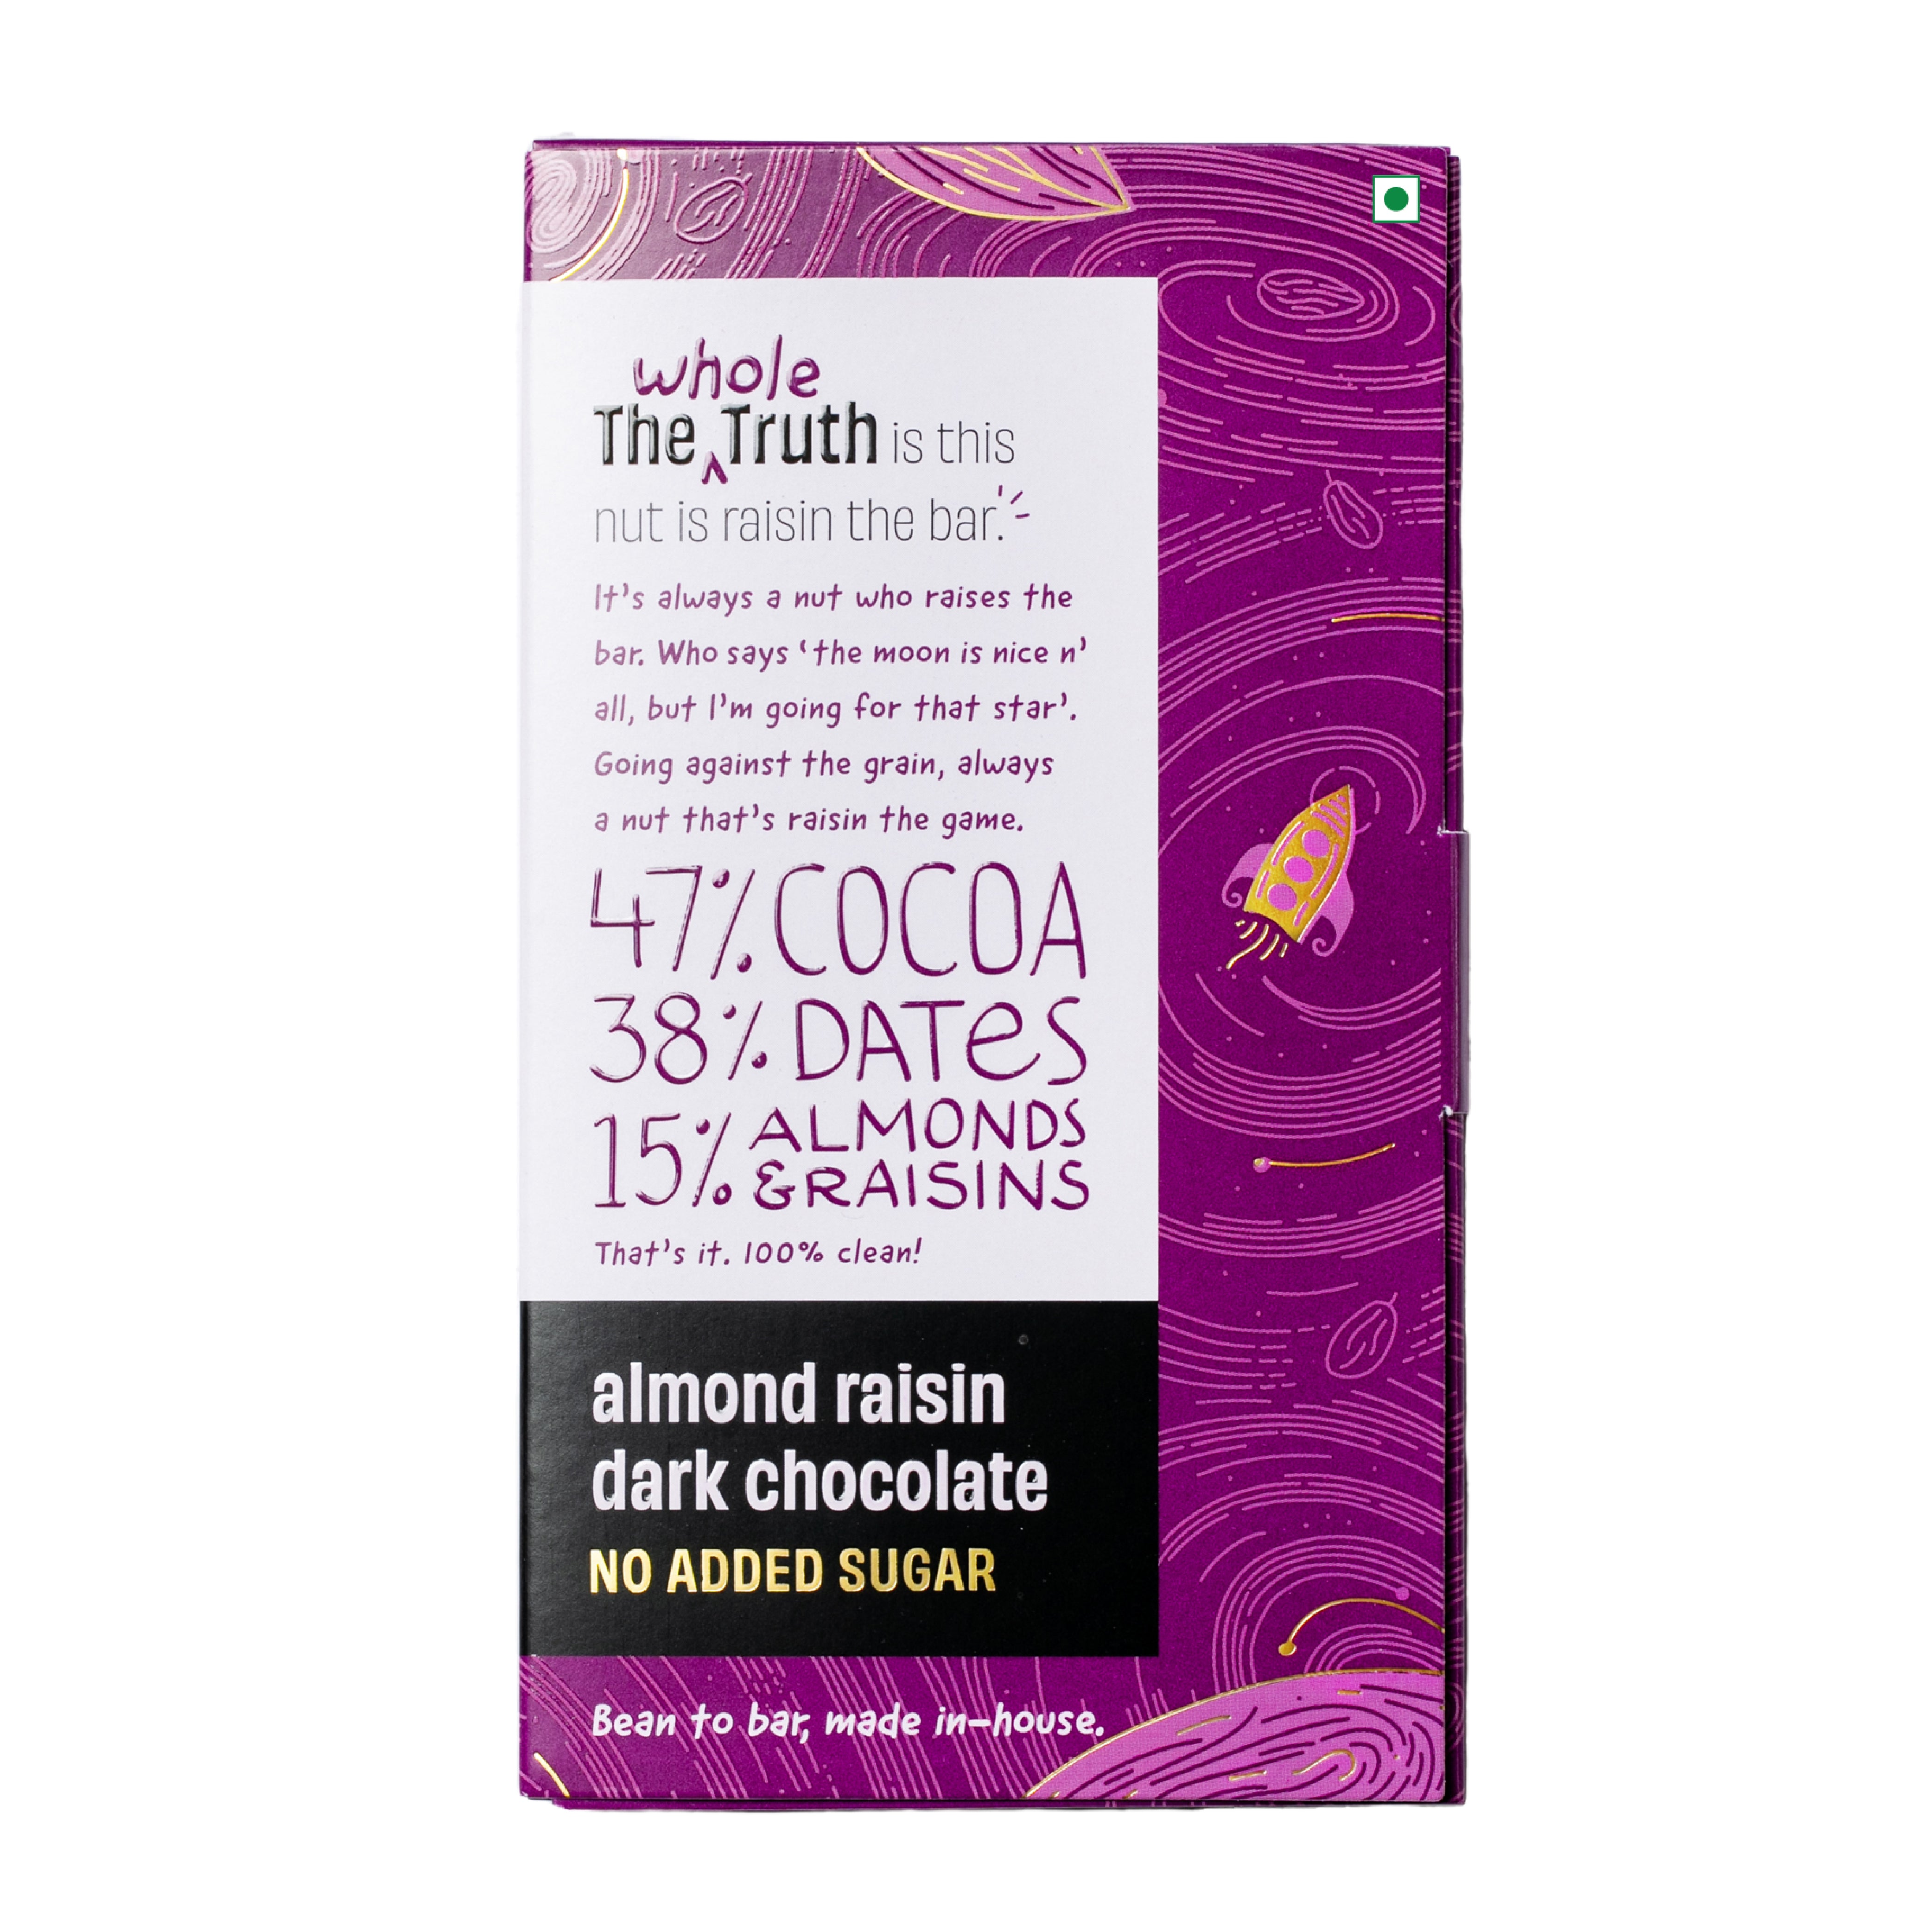 The Whole Truth Dark Chocolate | Almond Raisin | Pack of 3 | No Added Sugar, Only Dates | 47% Cocoa, 38% Dates, 15% Almond & Raisins